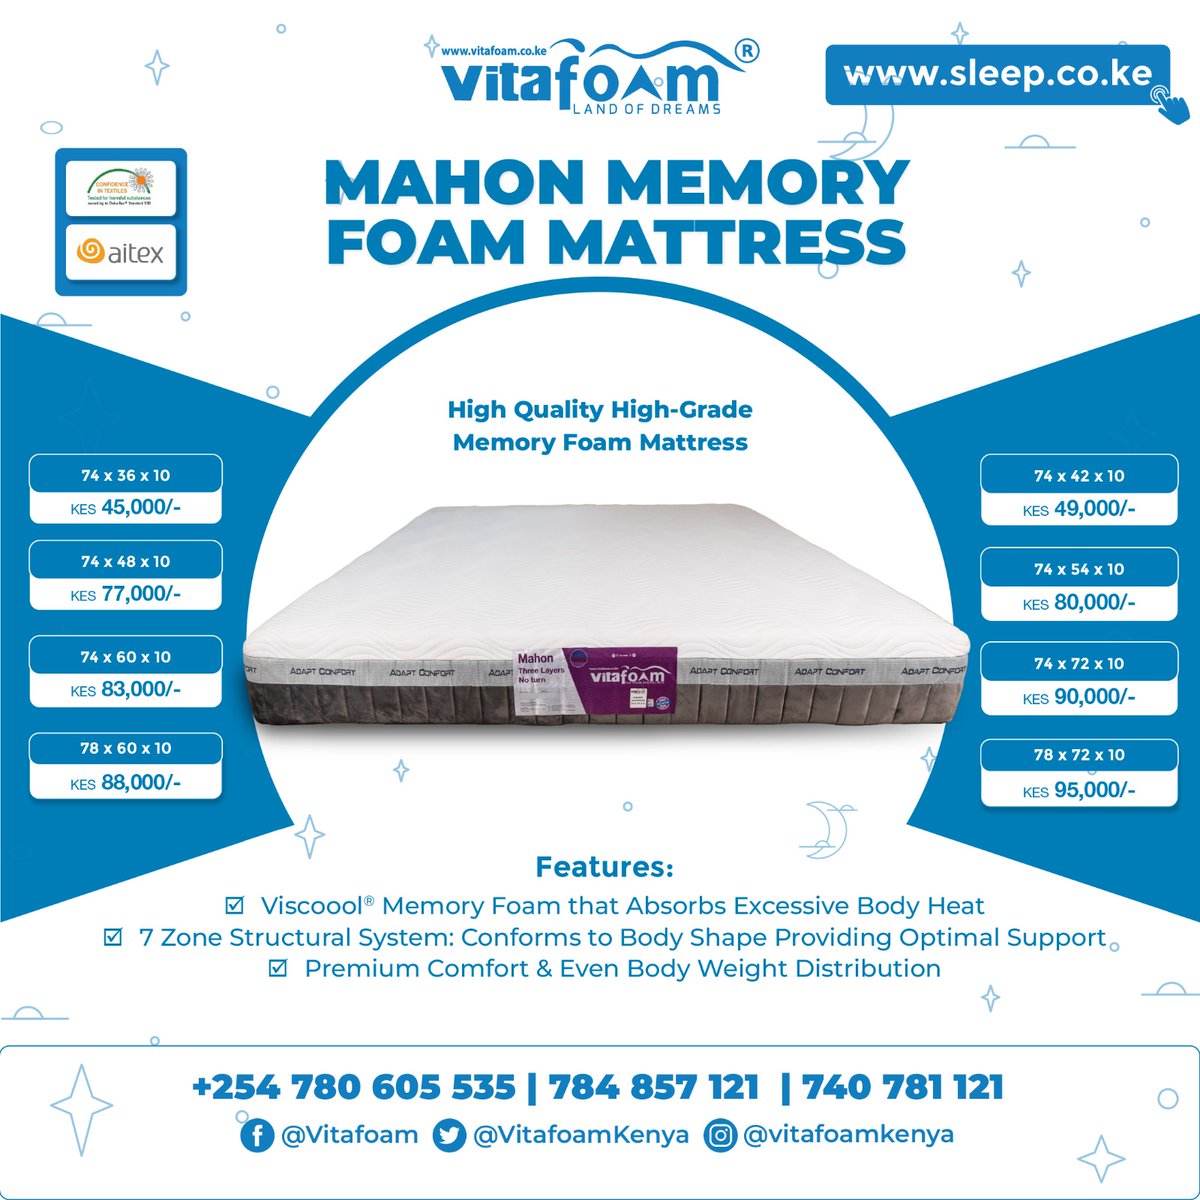 🌟😮☁️🛌🏾 #SleepBetter with our Amazing Mahon® Speciality Memory Foam Mattress only from #VitaFoamKenya! 🛌🏾☁️😮🌟 ☎ For All Your Mattress, Pillow, Bed & Sleep Accessory *Enquiries, *Orders & *Deliveries: +254 780 605 535 | 740 781 121 📍 bit.ly/30VqOrf